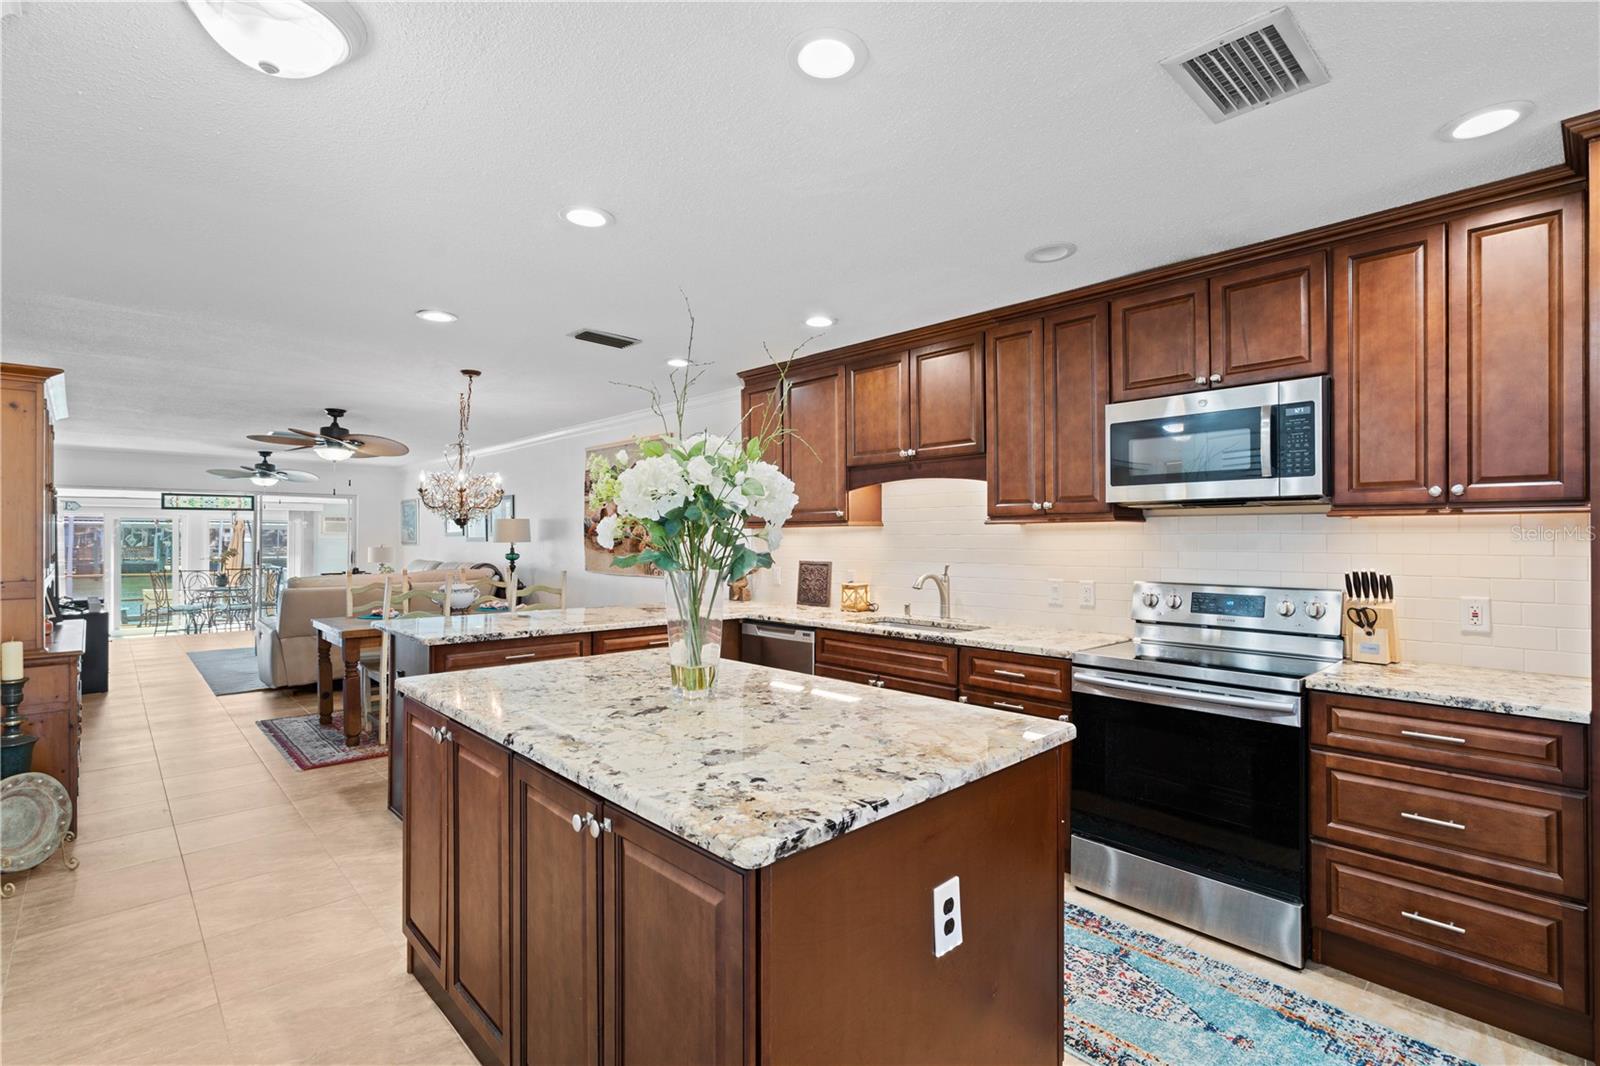 Spacious kitchen features Island with wood cabinetry and stone counters